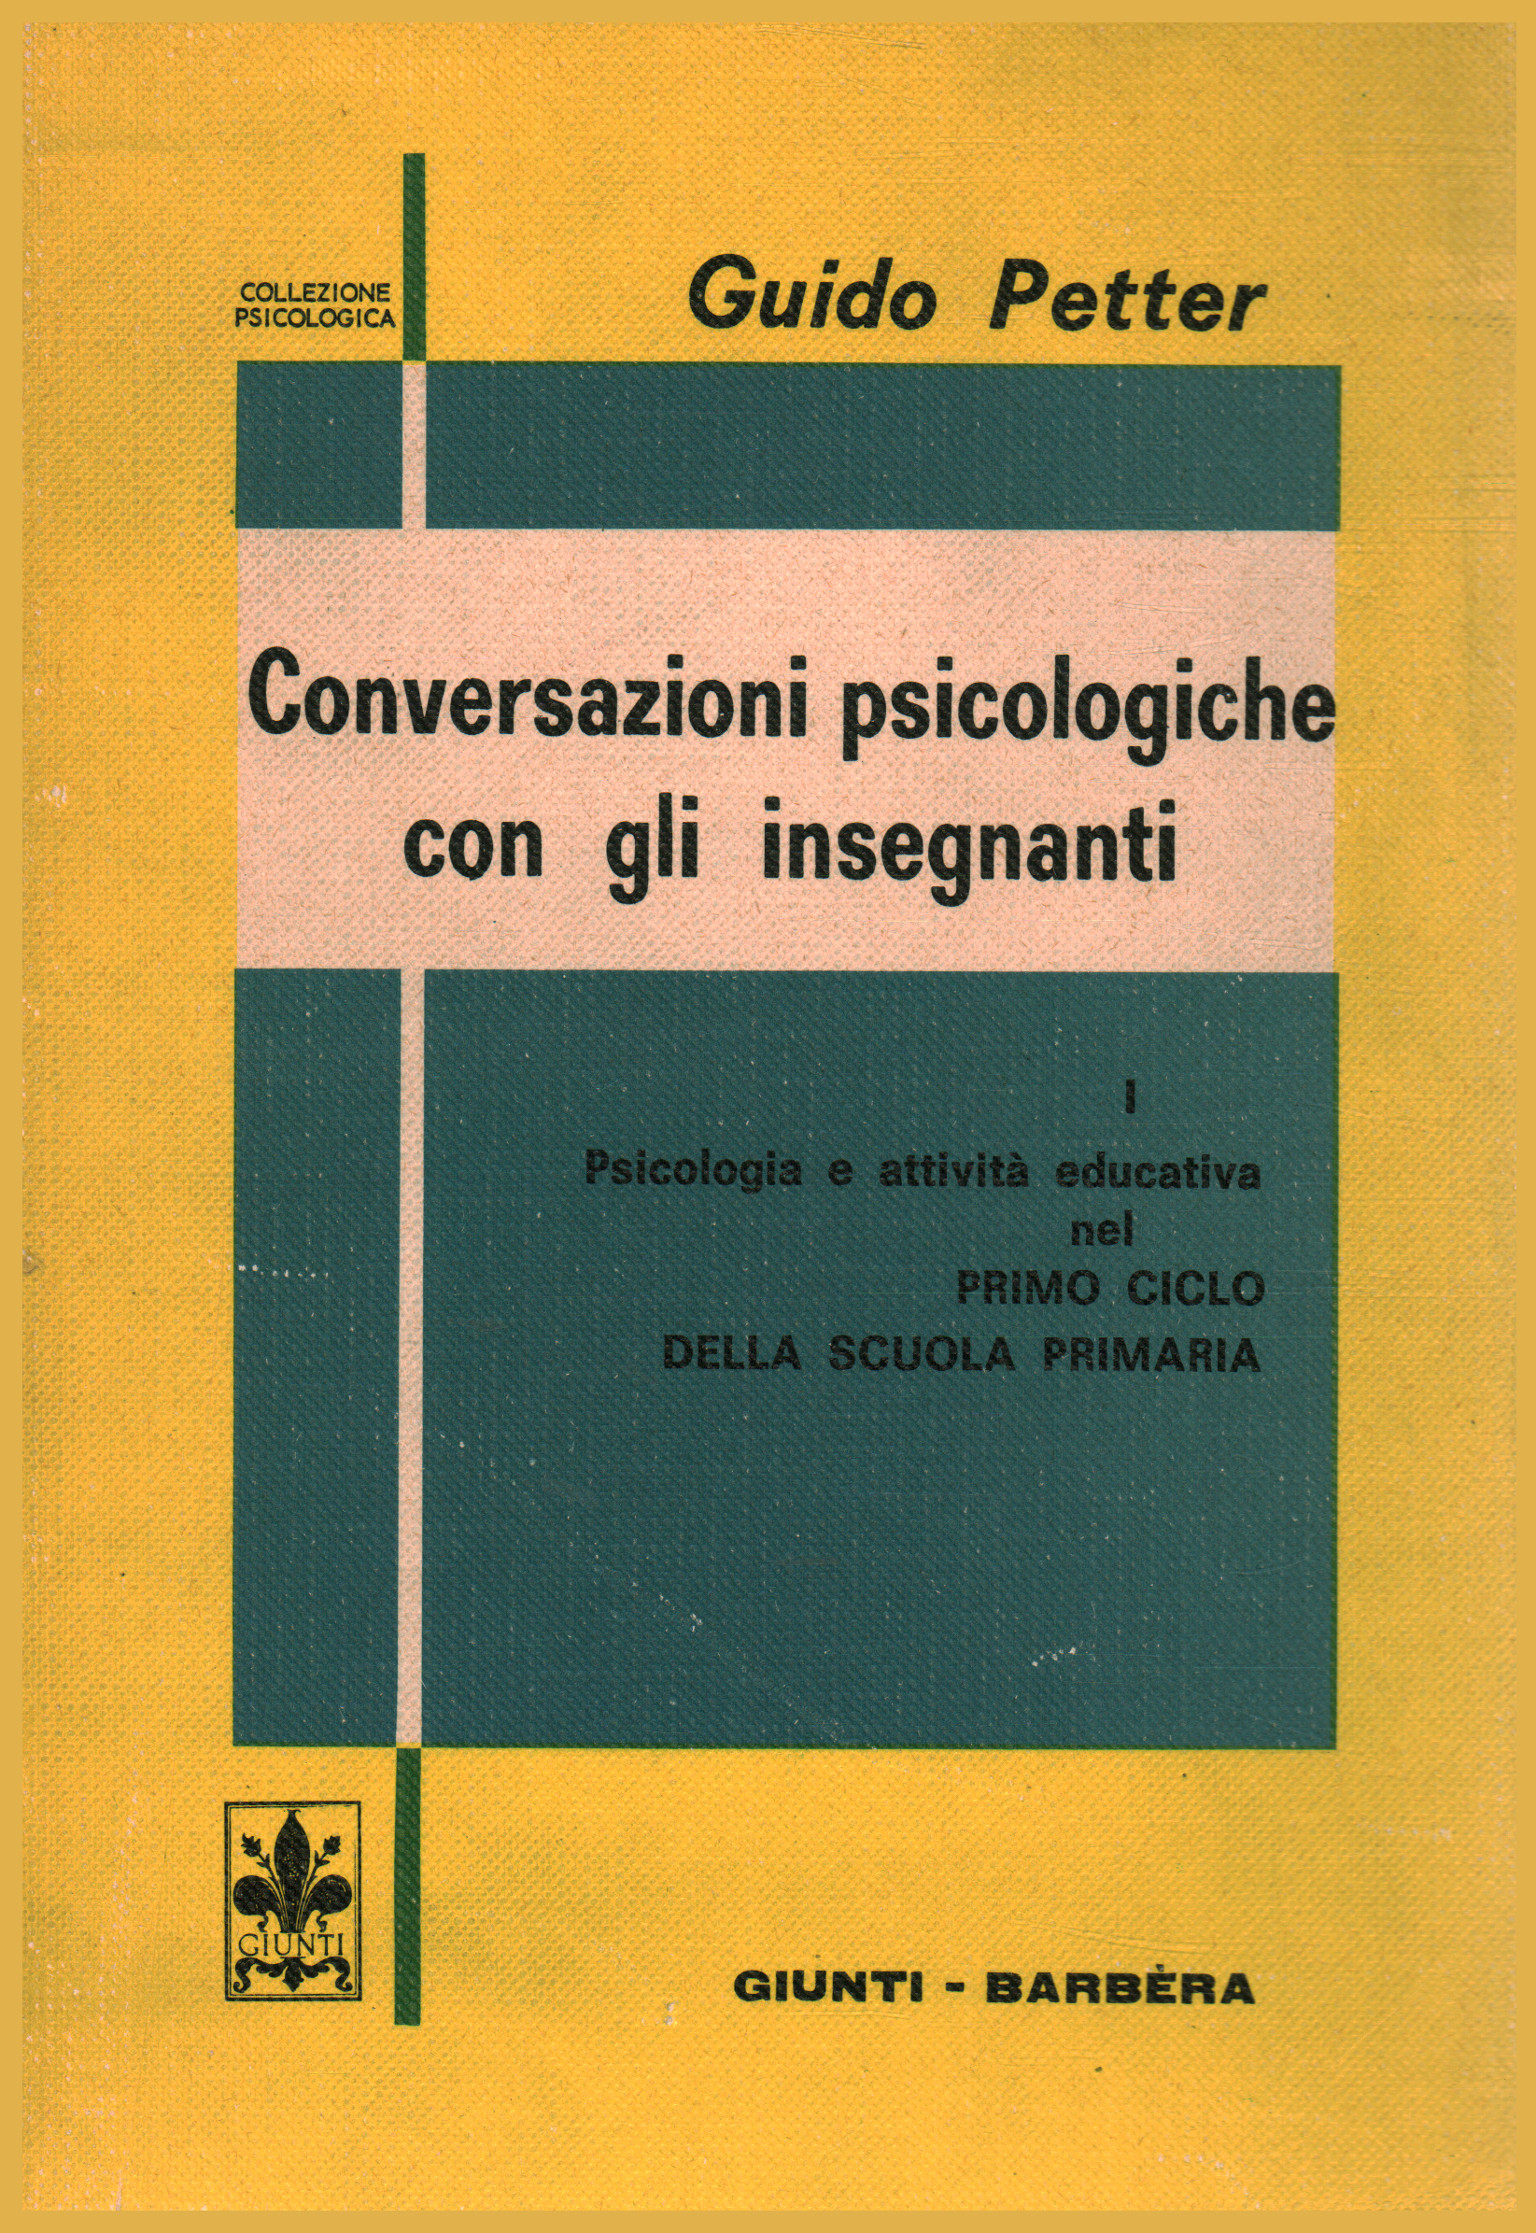 Conversations psychological with teachers, Guido Petter